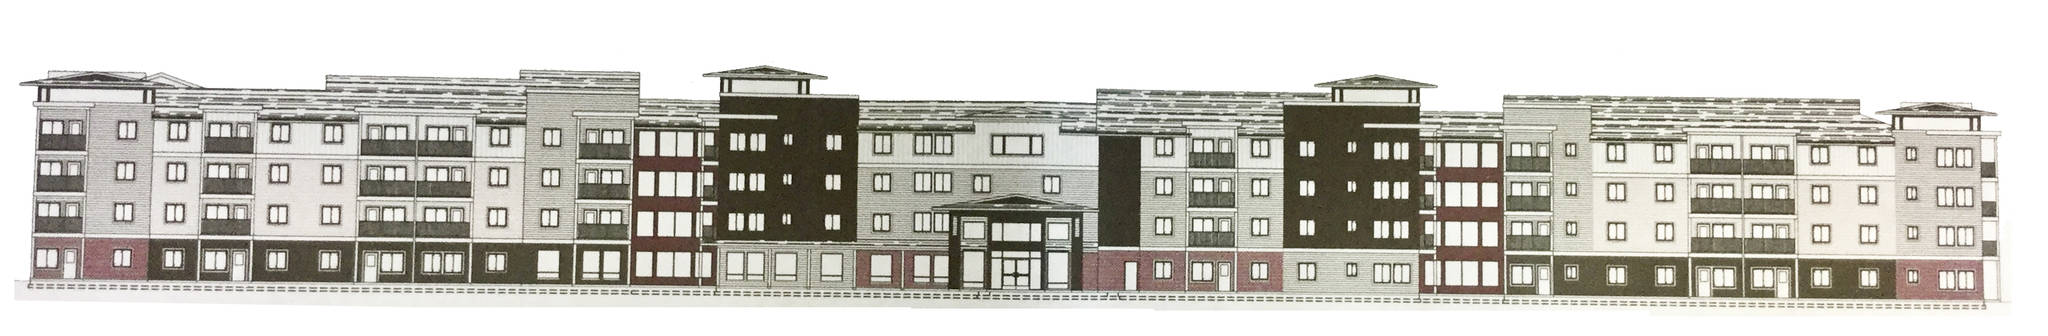 A rendering of the 255-unit Smokey Point Apartments, a senior living community to be built by AMCAL Multi-Housing, at 172nd Street NE and 40th Avenue NE in Smokey Point.